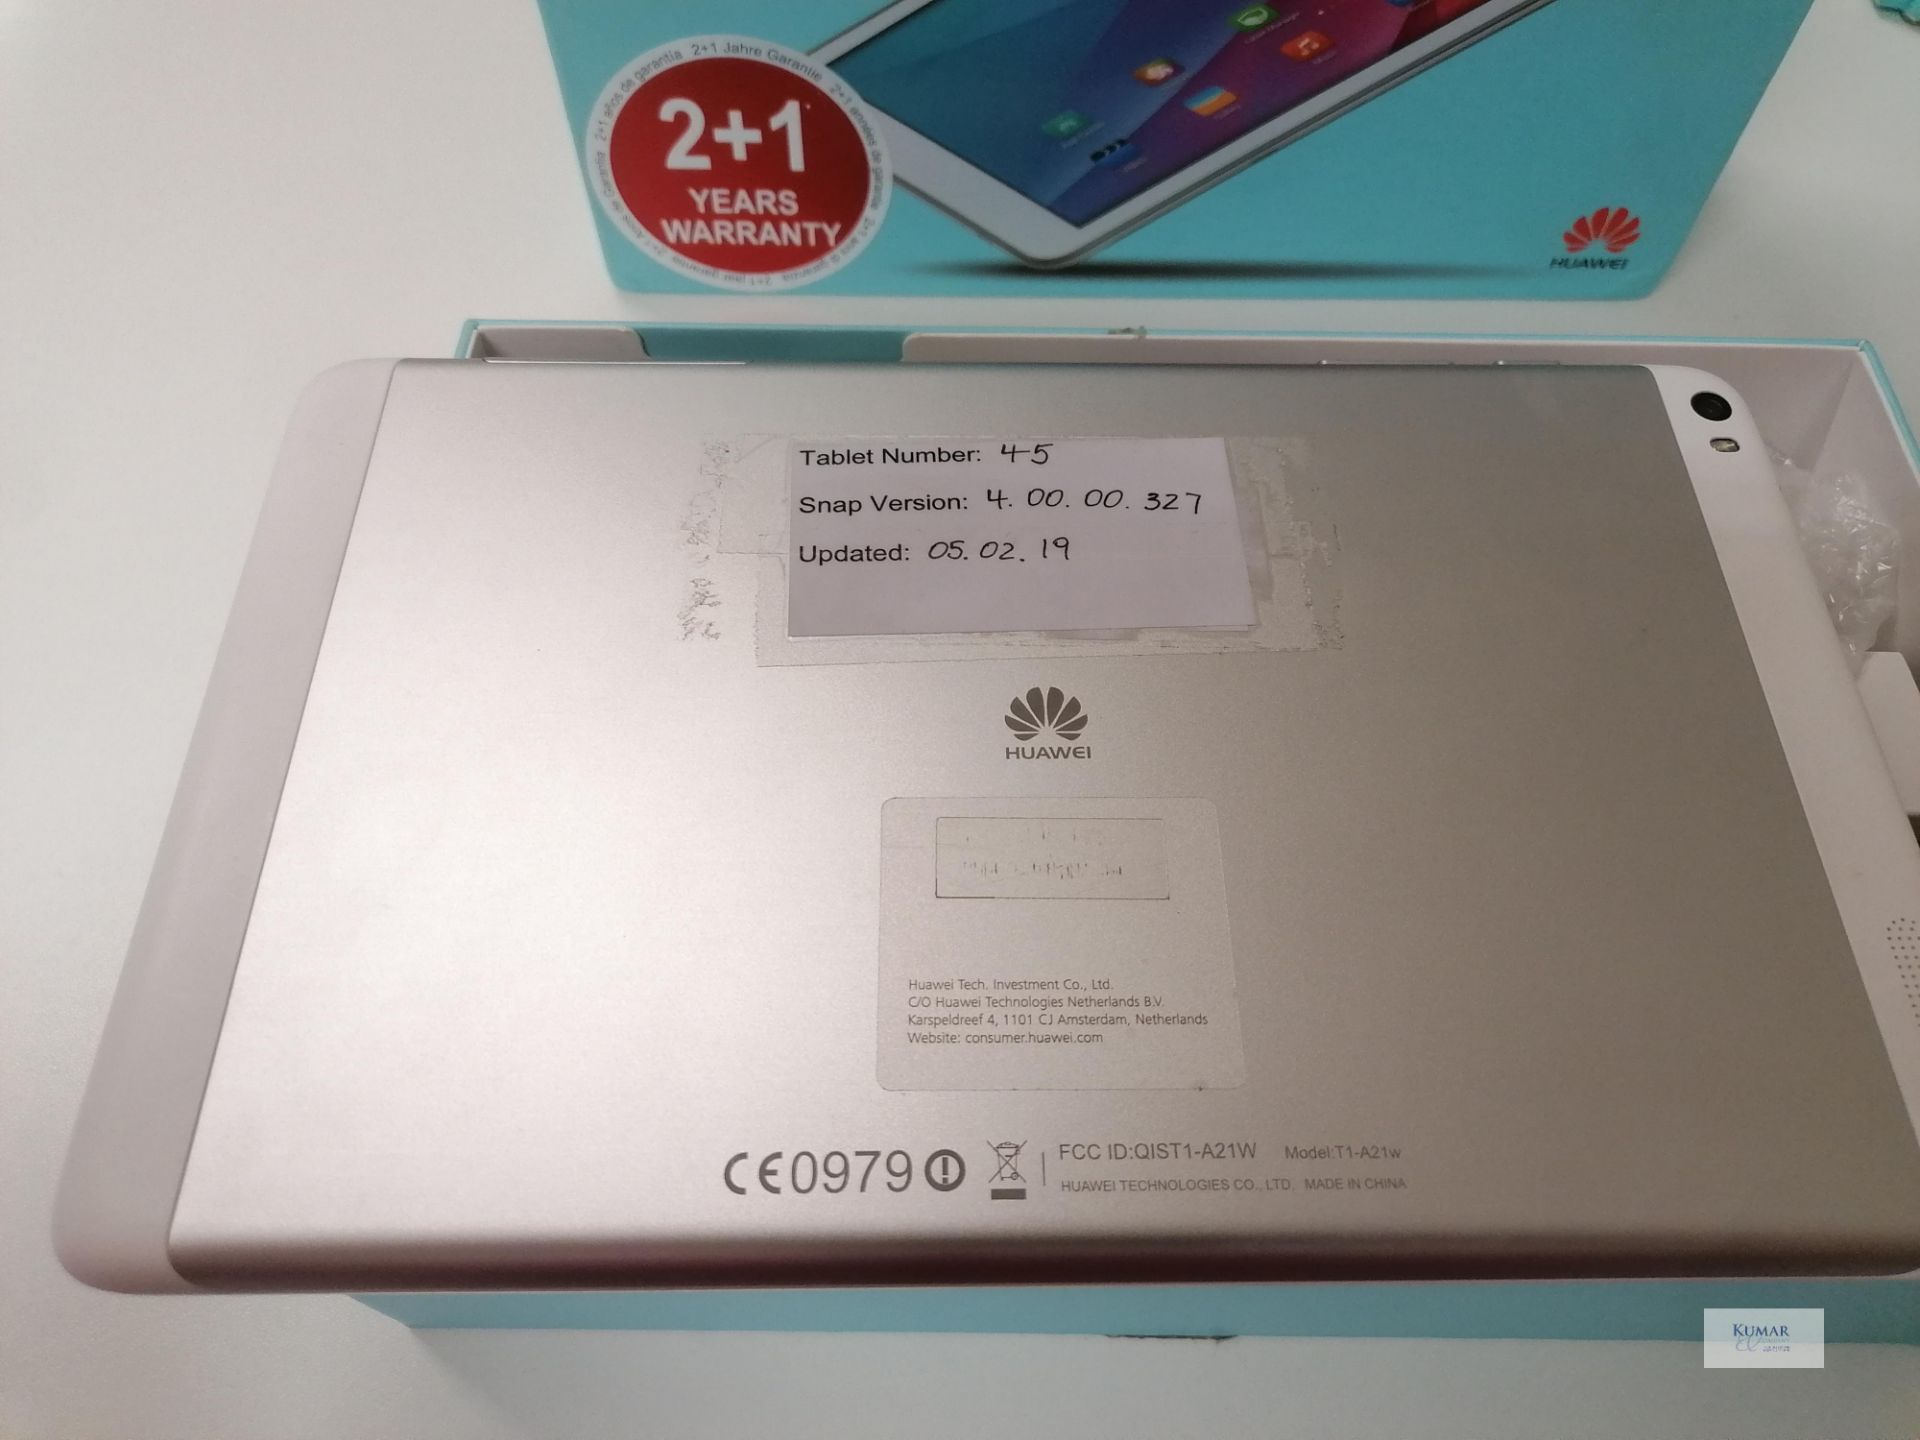 Huawei Media pad T1-10 16GB 10.1" Touch screen Updated 05 02 2019 Cable and charger - Image 7 of 8